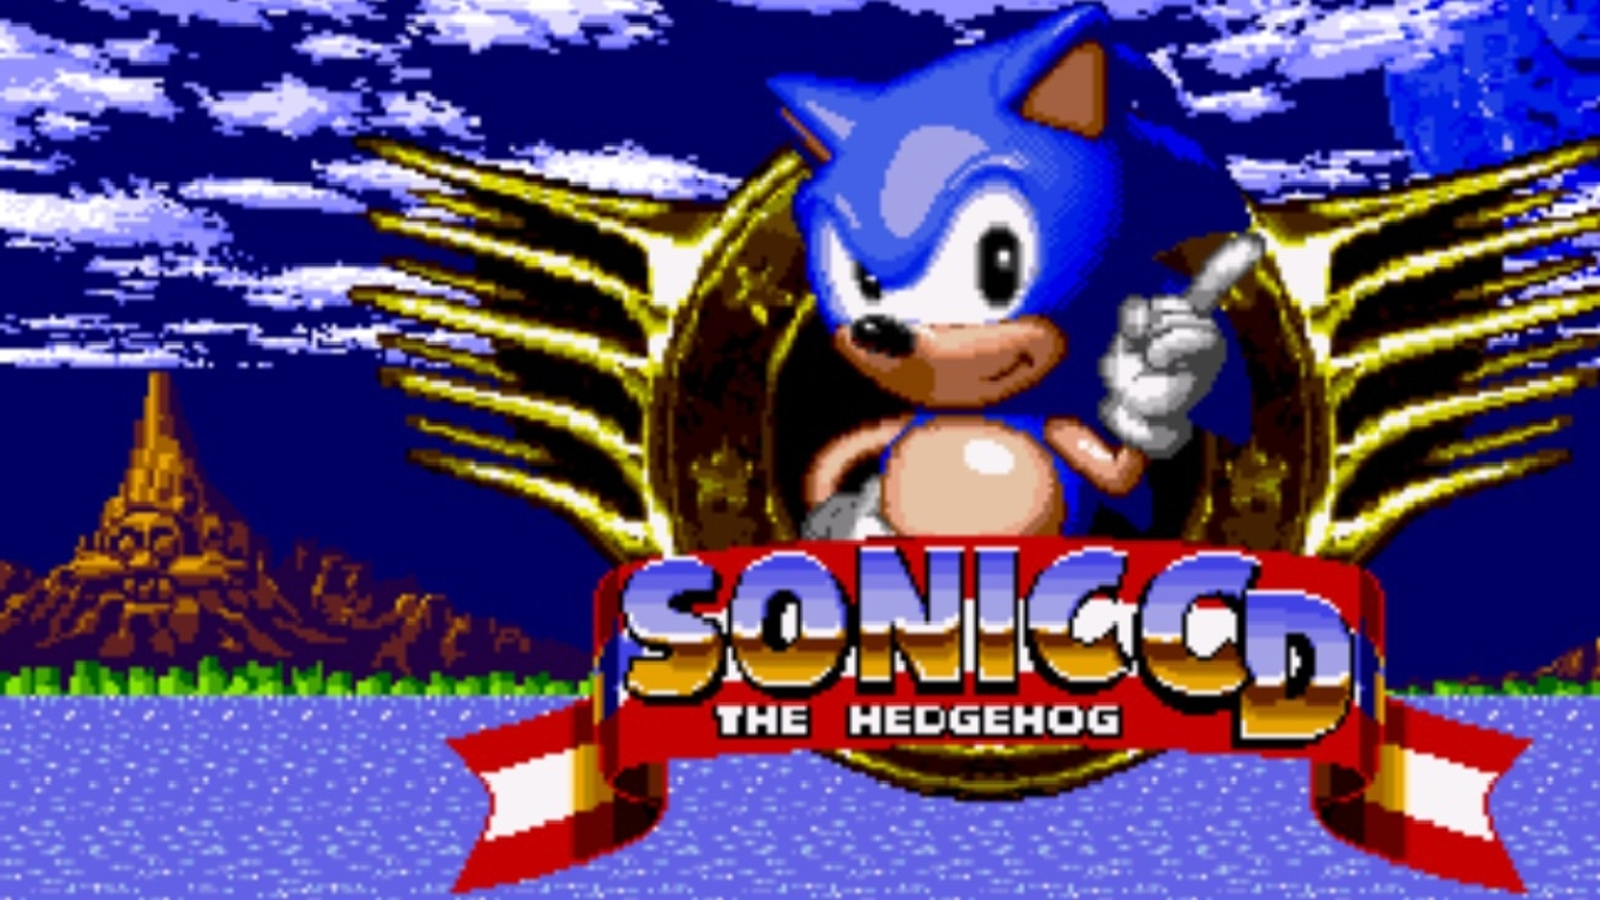 Play Genesis Sonic The Hedgehog 4 Online in your browser 